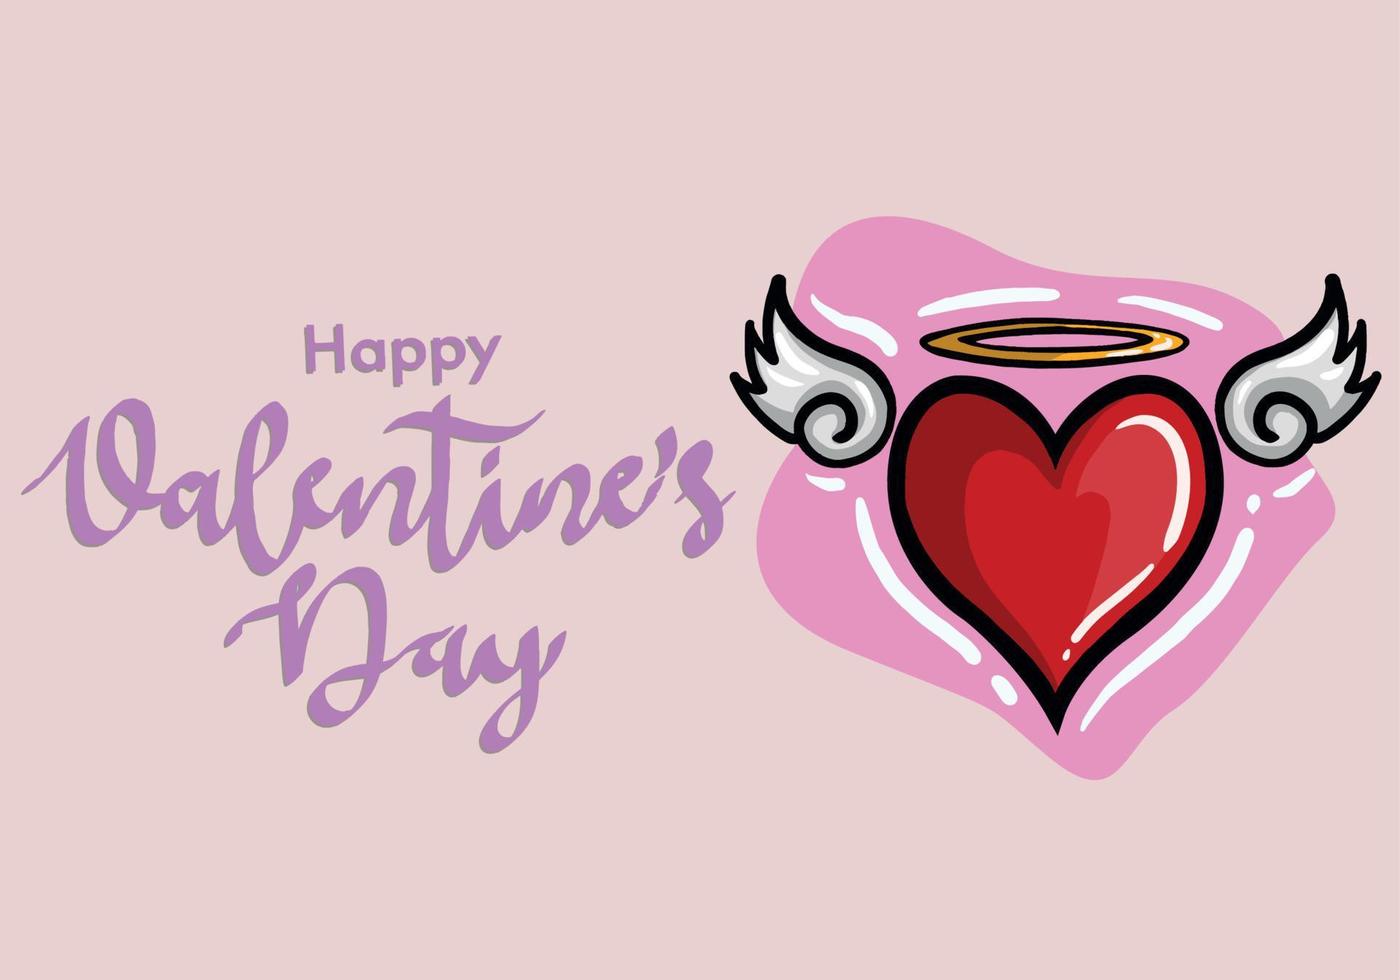 Happy Valentine's Day Vector Design. Valentine's Day Vector With Red Heart and angle wings. Valentine's Day Design for Poster, Social Media, Banner or Advertisement.